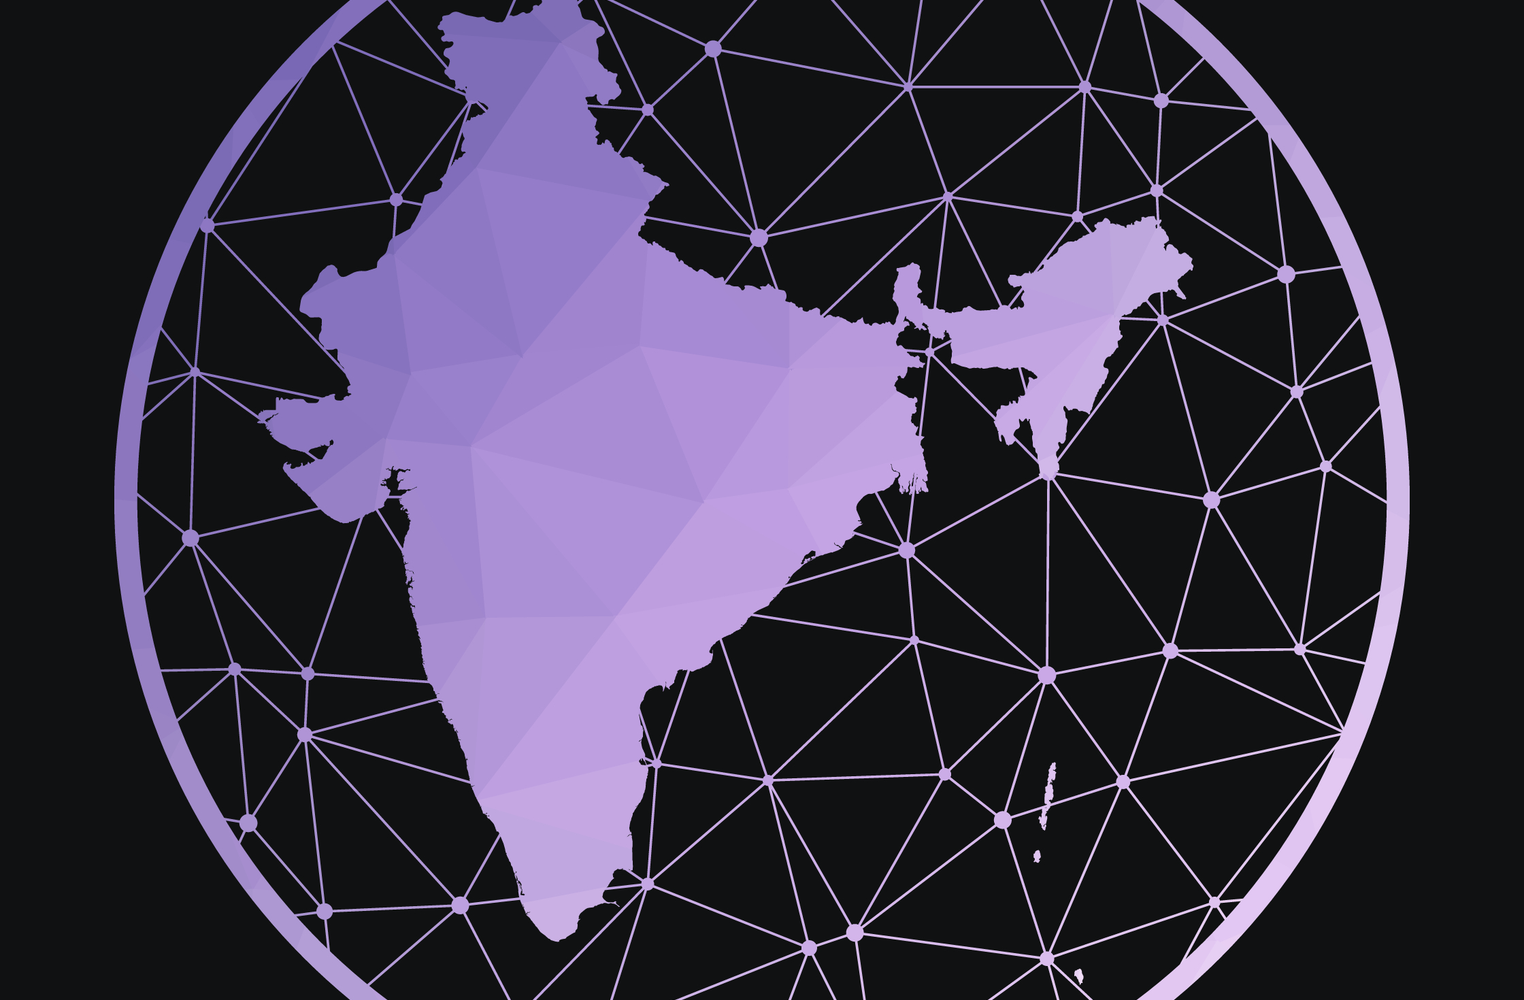 How Popular Is the Dark Web in India? A Look at Increasing Tech Use and Free Market Potential